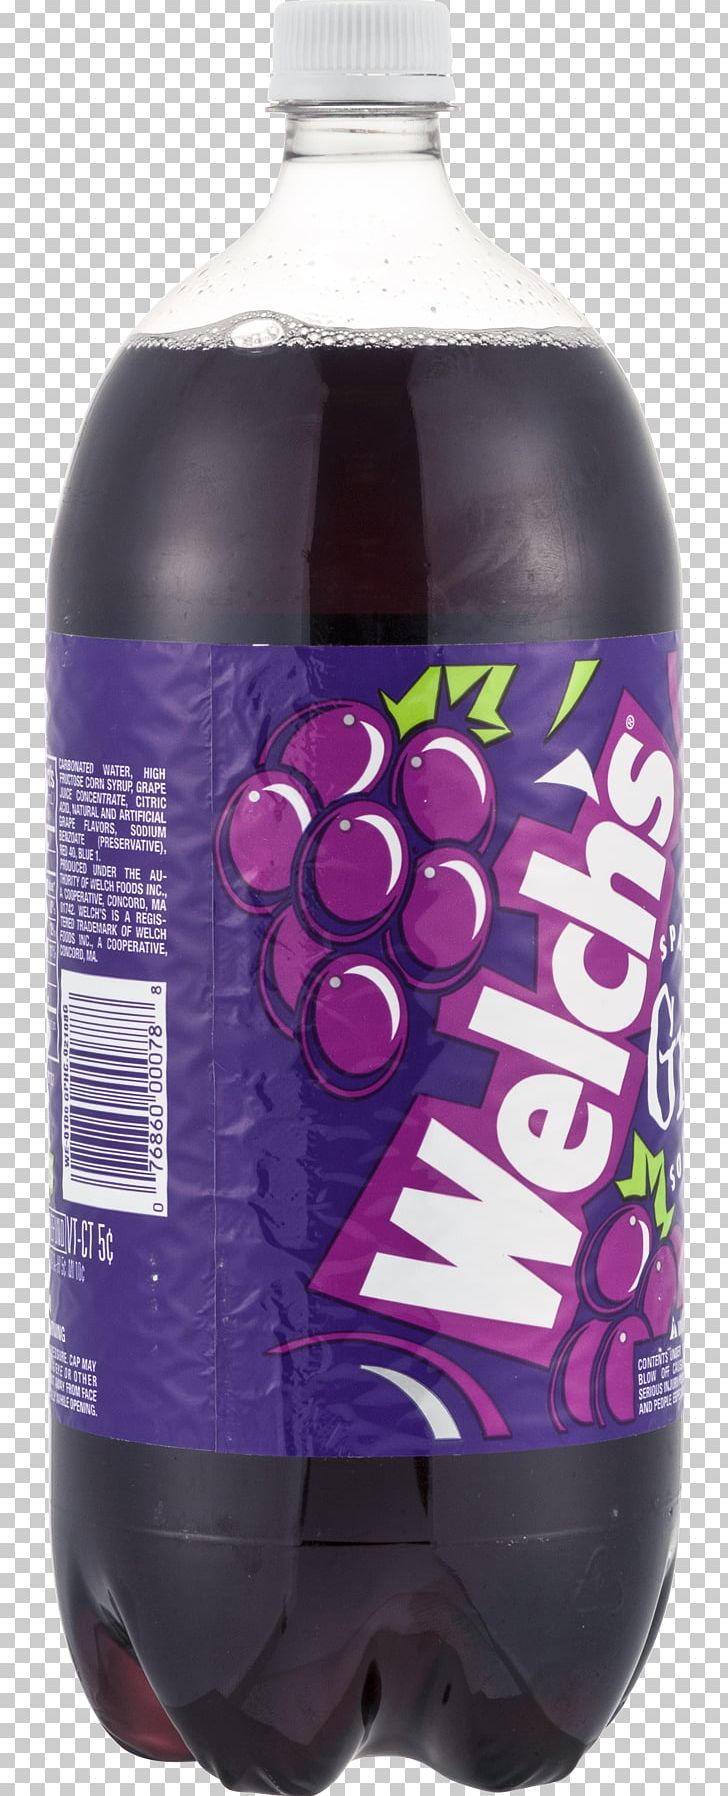 Fizzy Drinks Grape Soda Welch's Orange Soft Drink PNG, Clipart, Bottle, Carbonated Water, Com, Drink, Fizzy Drinks Free PNG Download